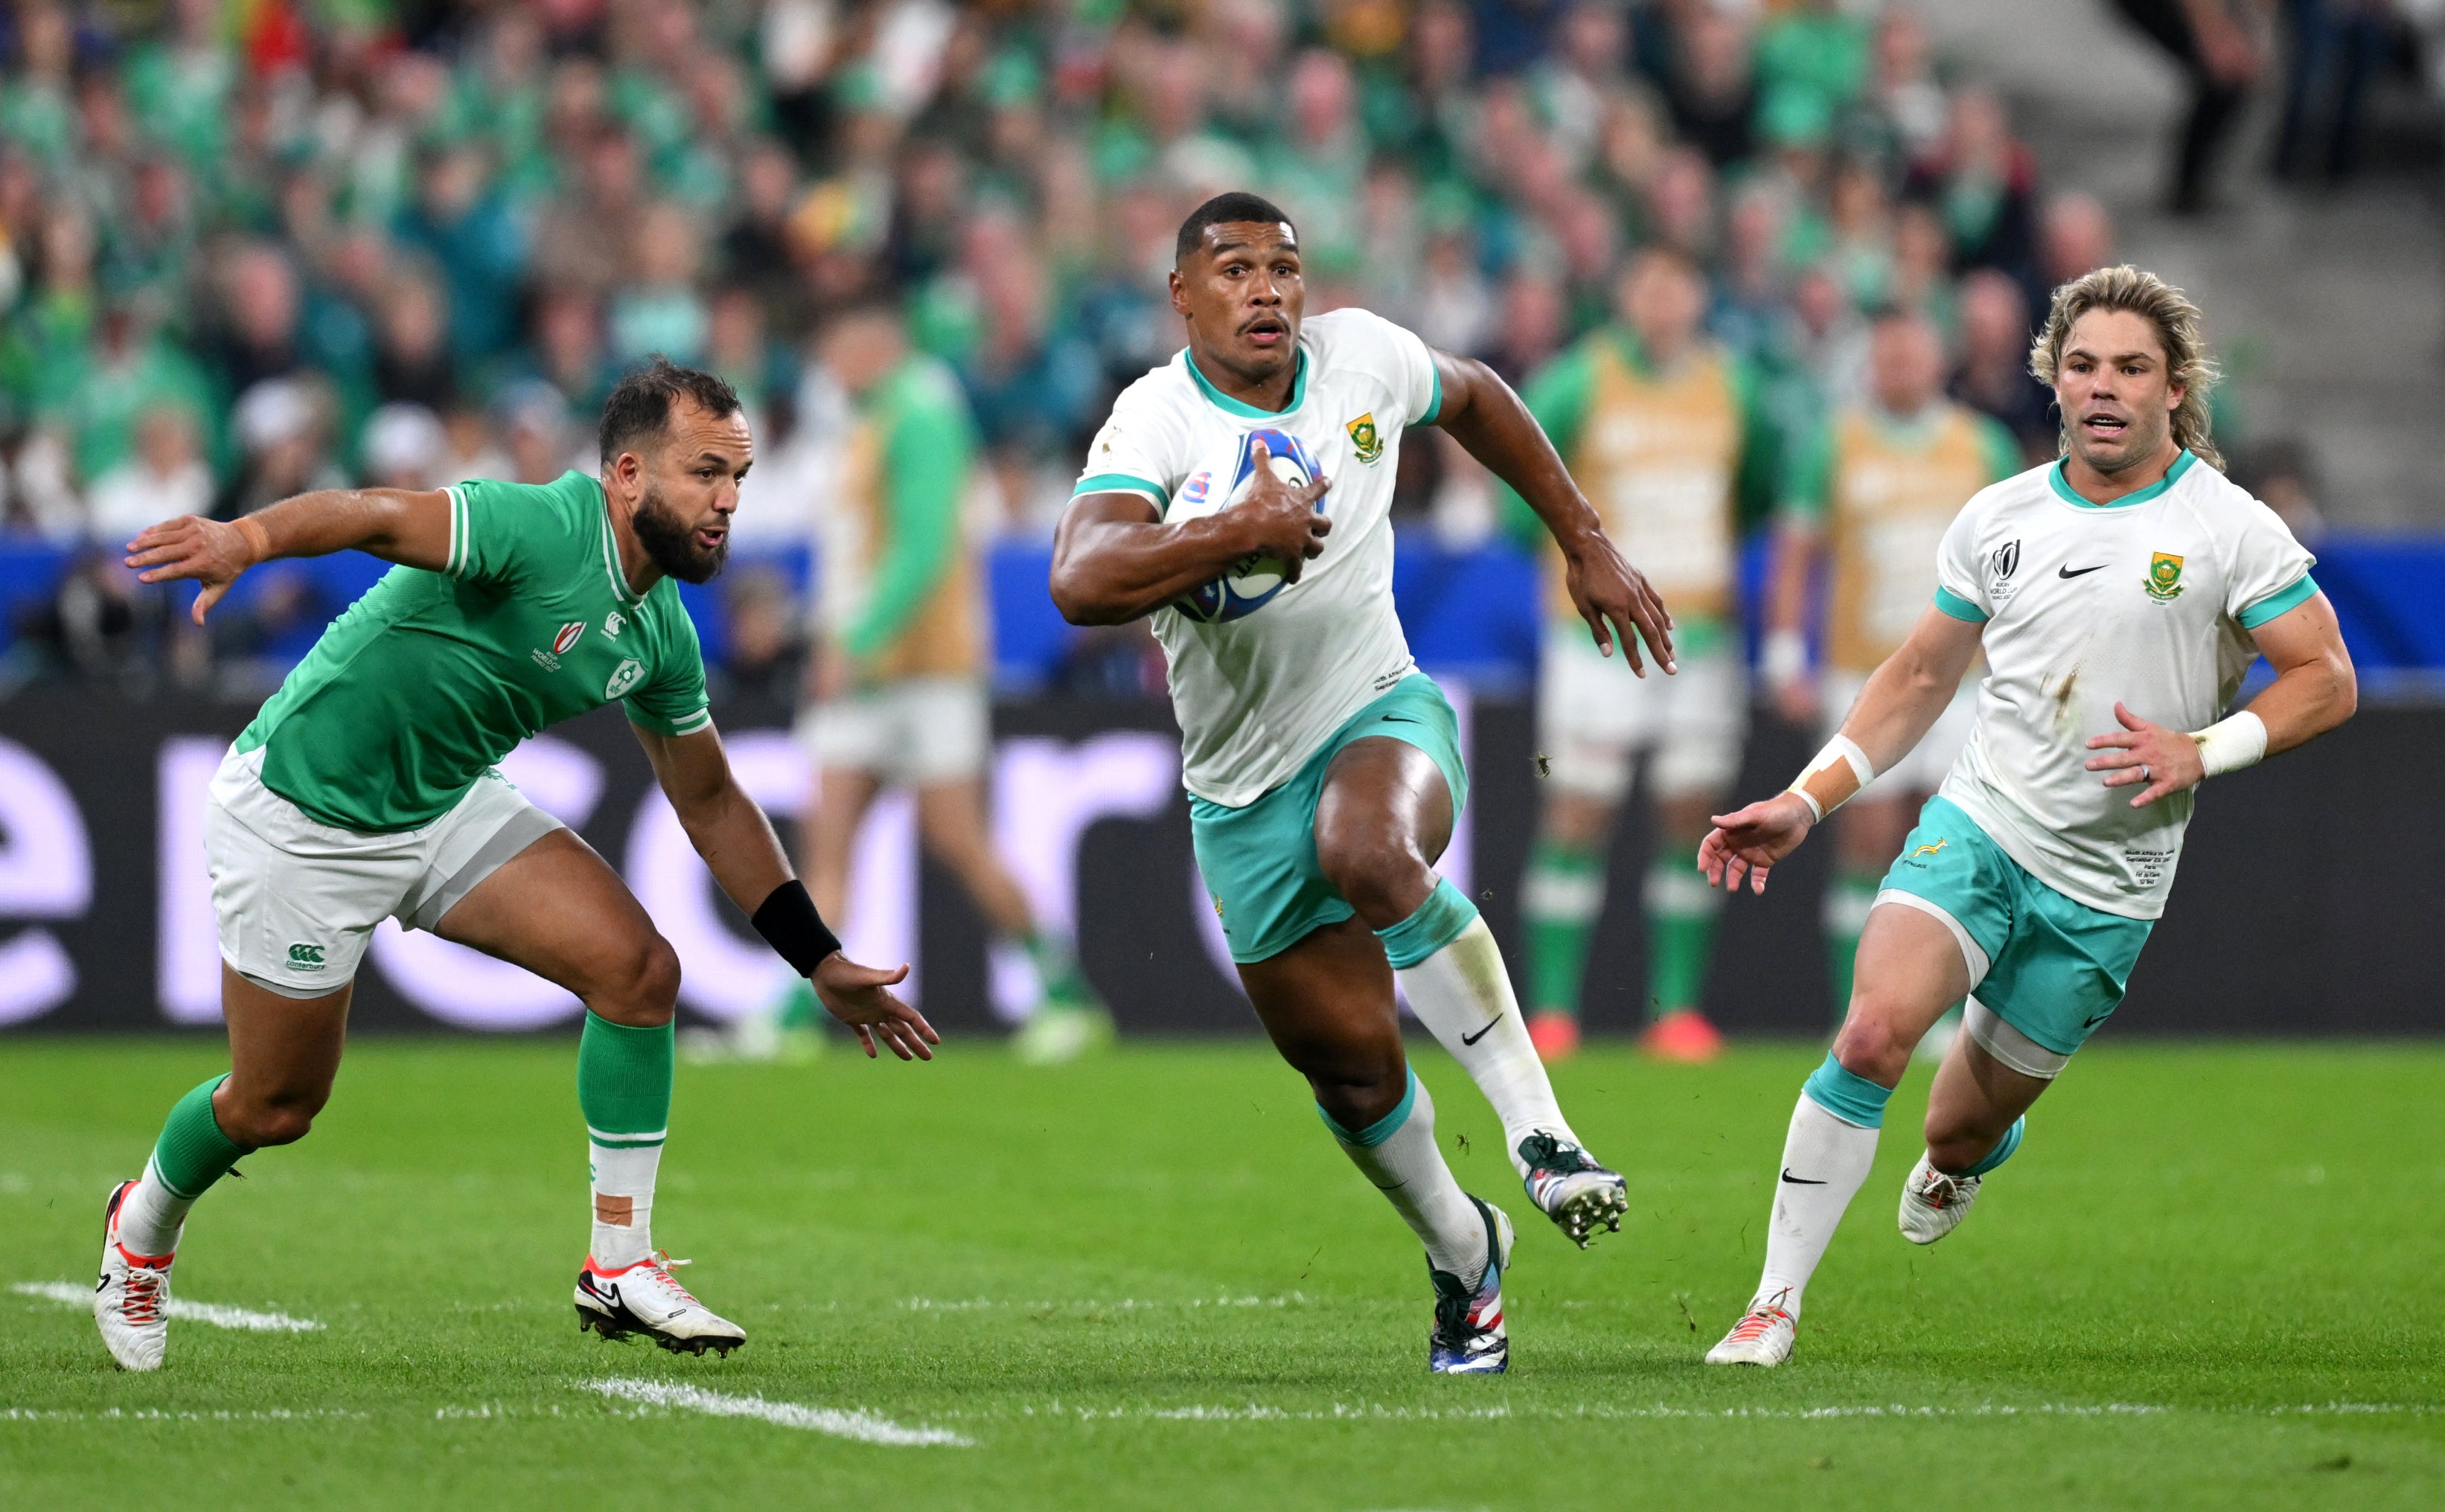 Damian Willemse of South Africa runs with the ball